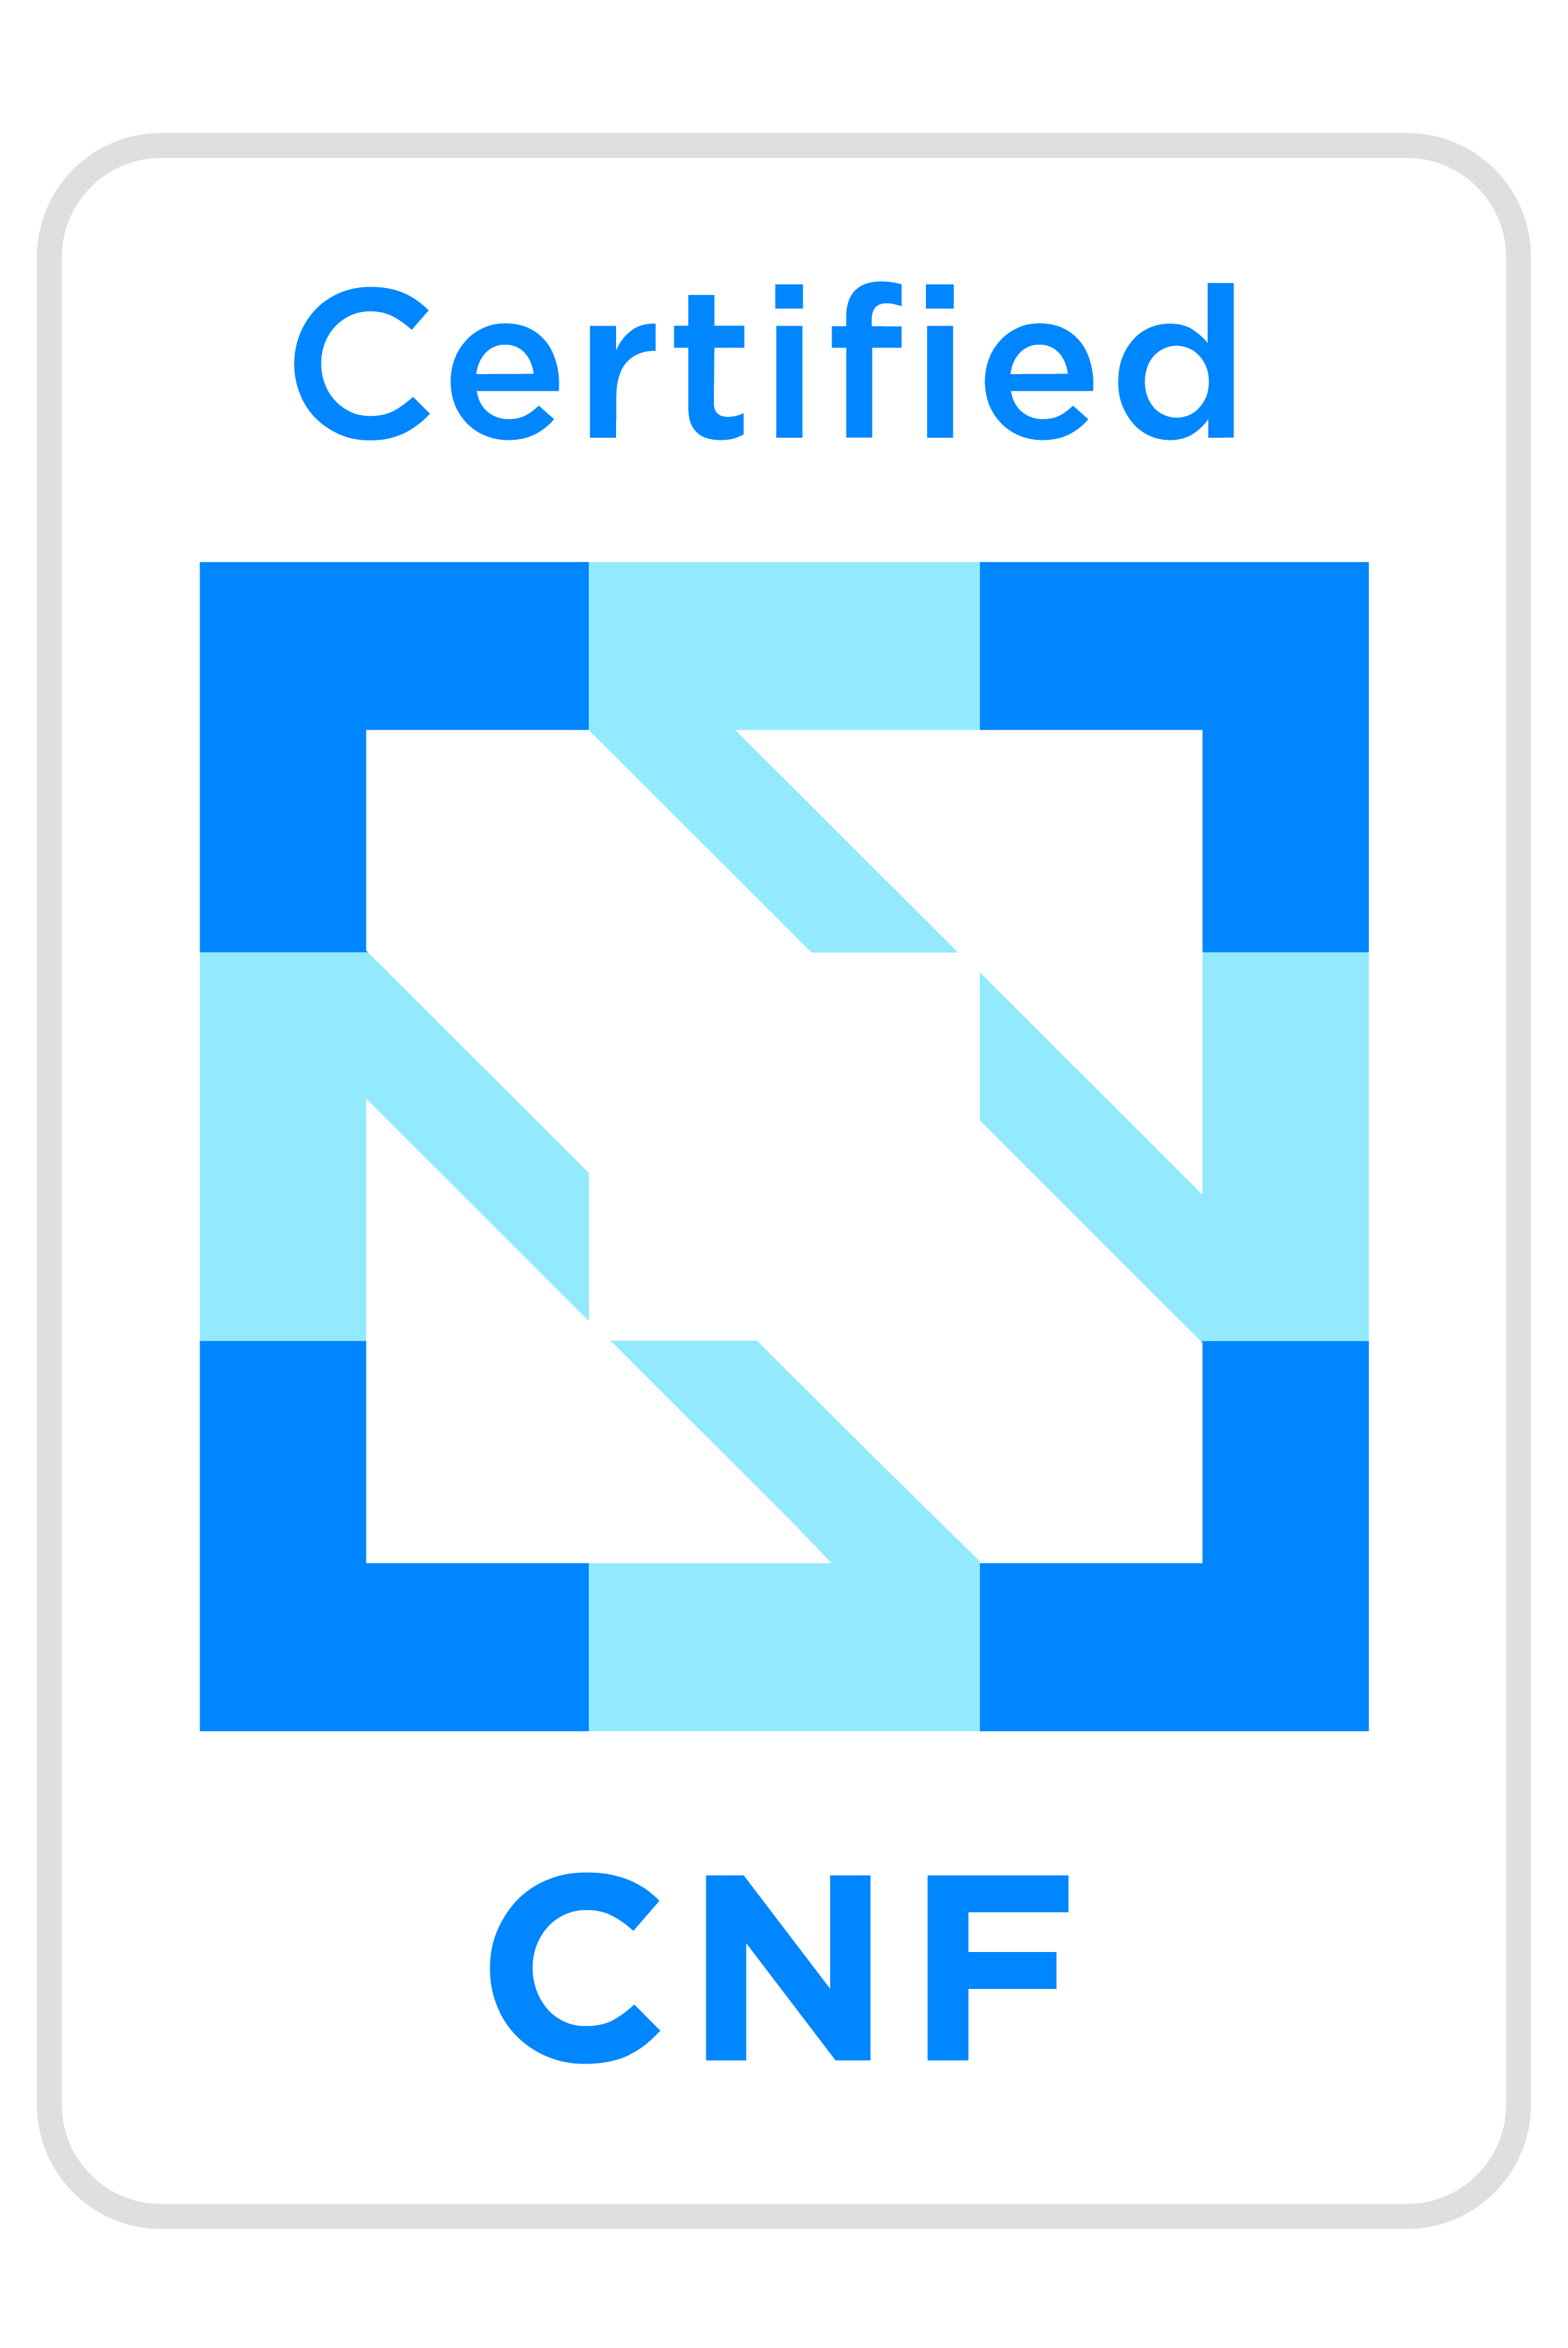 cnf-certified-color-2.png